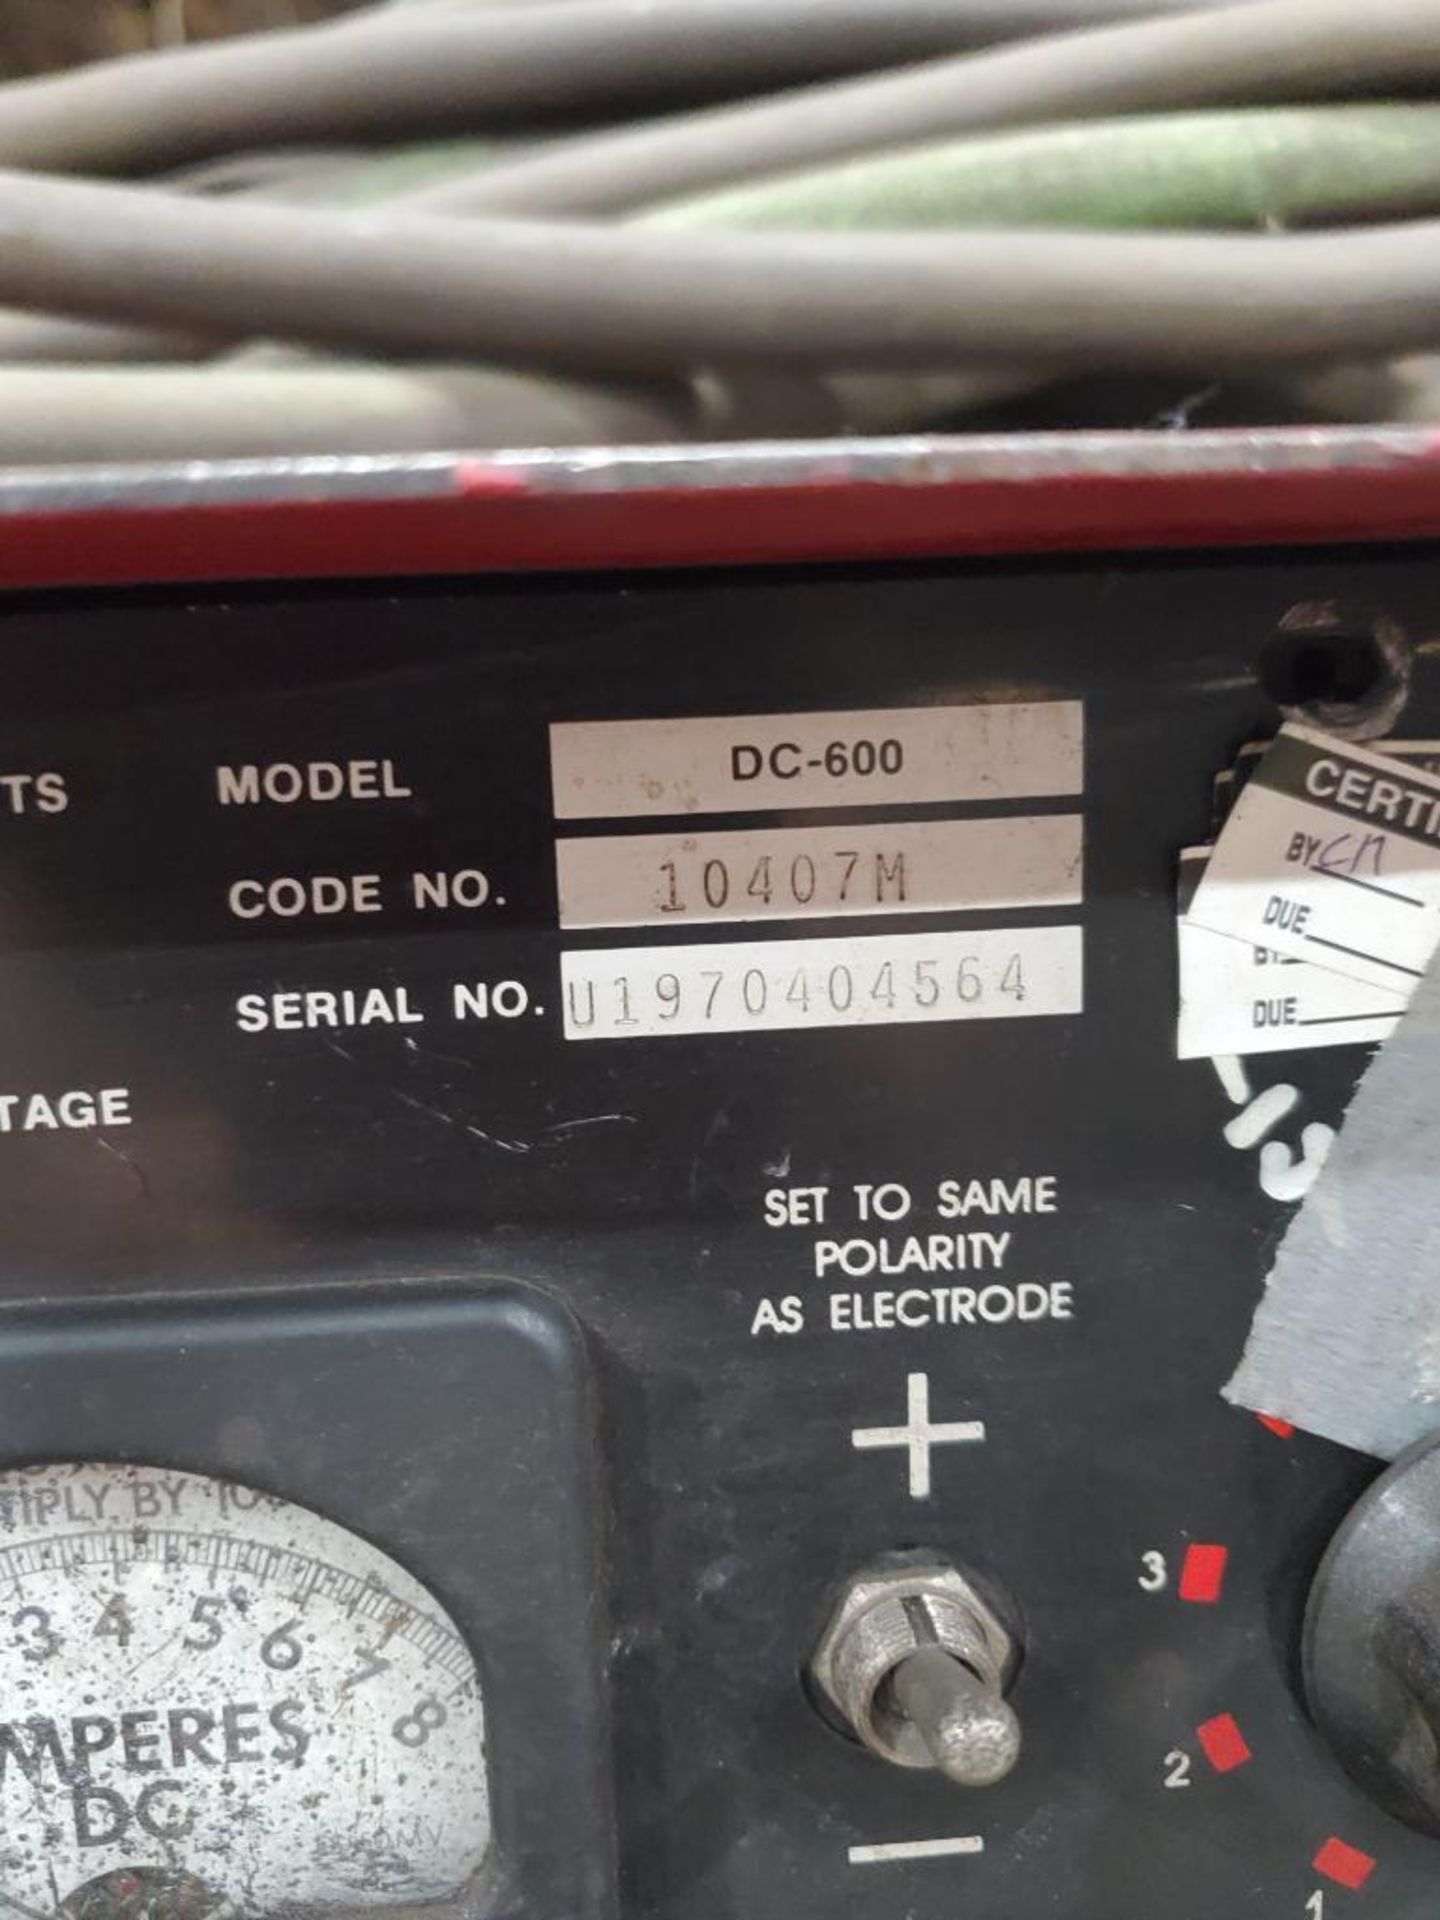 LINCOLN ELECTRIC IDEALARC DC-600 WELDER SN.U1970404564 230-460V WITH LN-7 WIRE FEED SN.U1961005864 - Image 8 of 8